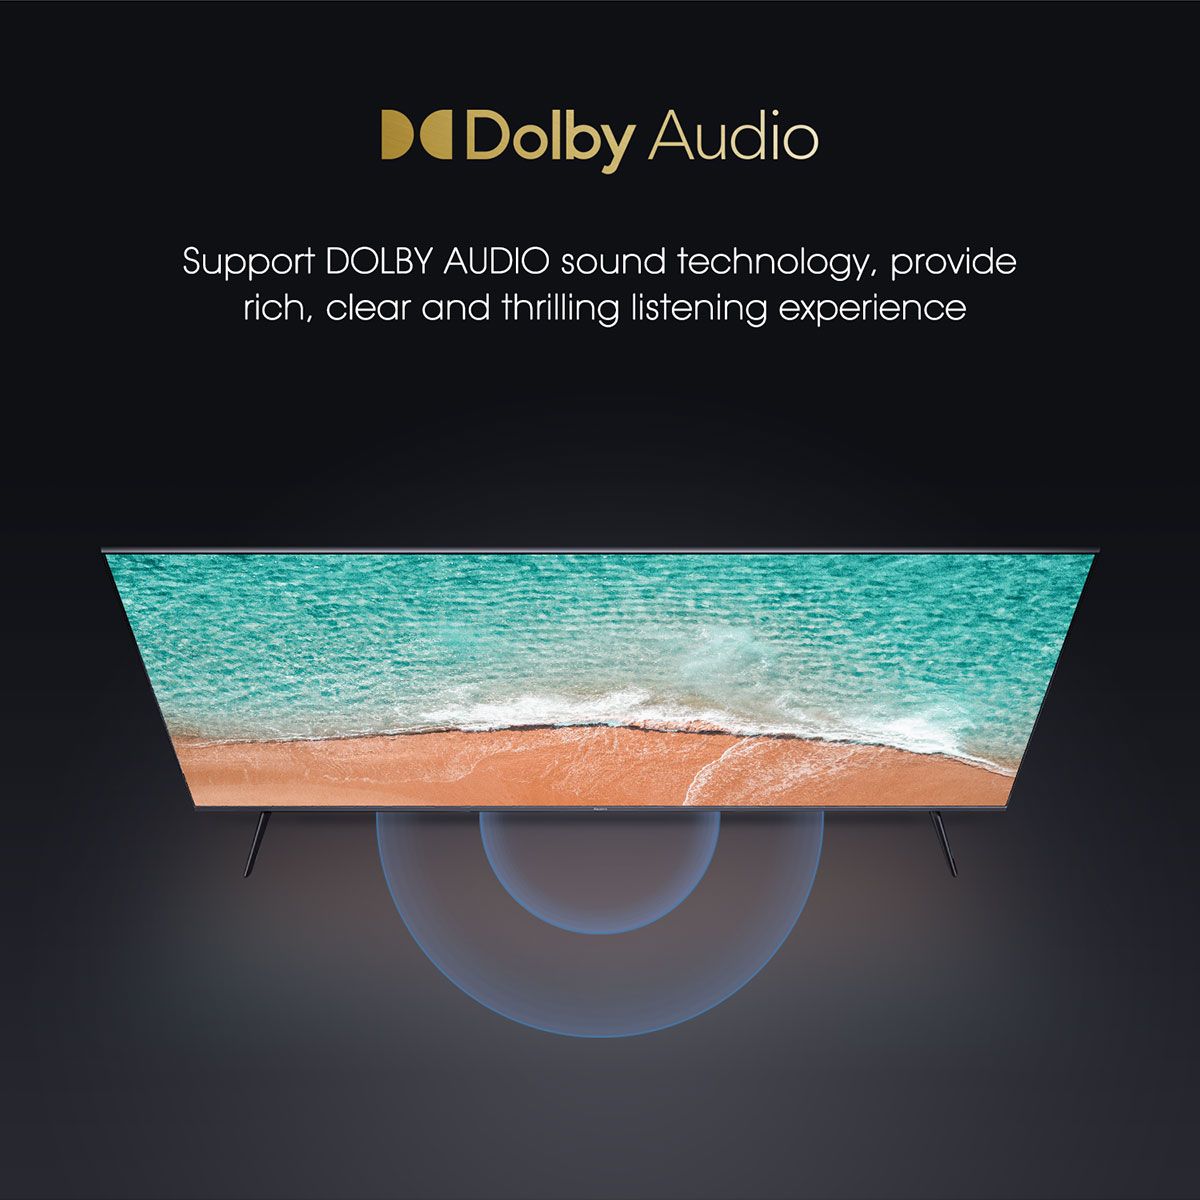 Dolby Audio Support DOLBY AUDIO sound technology, provide rich, clear and thrilling listening experience